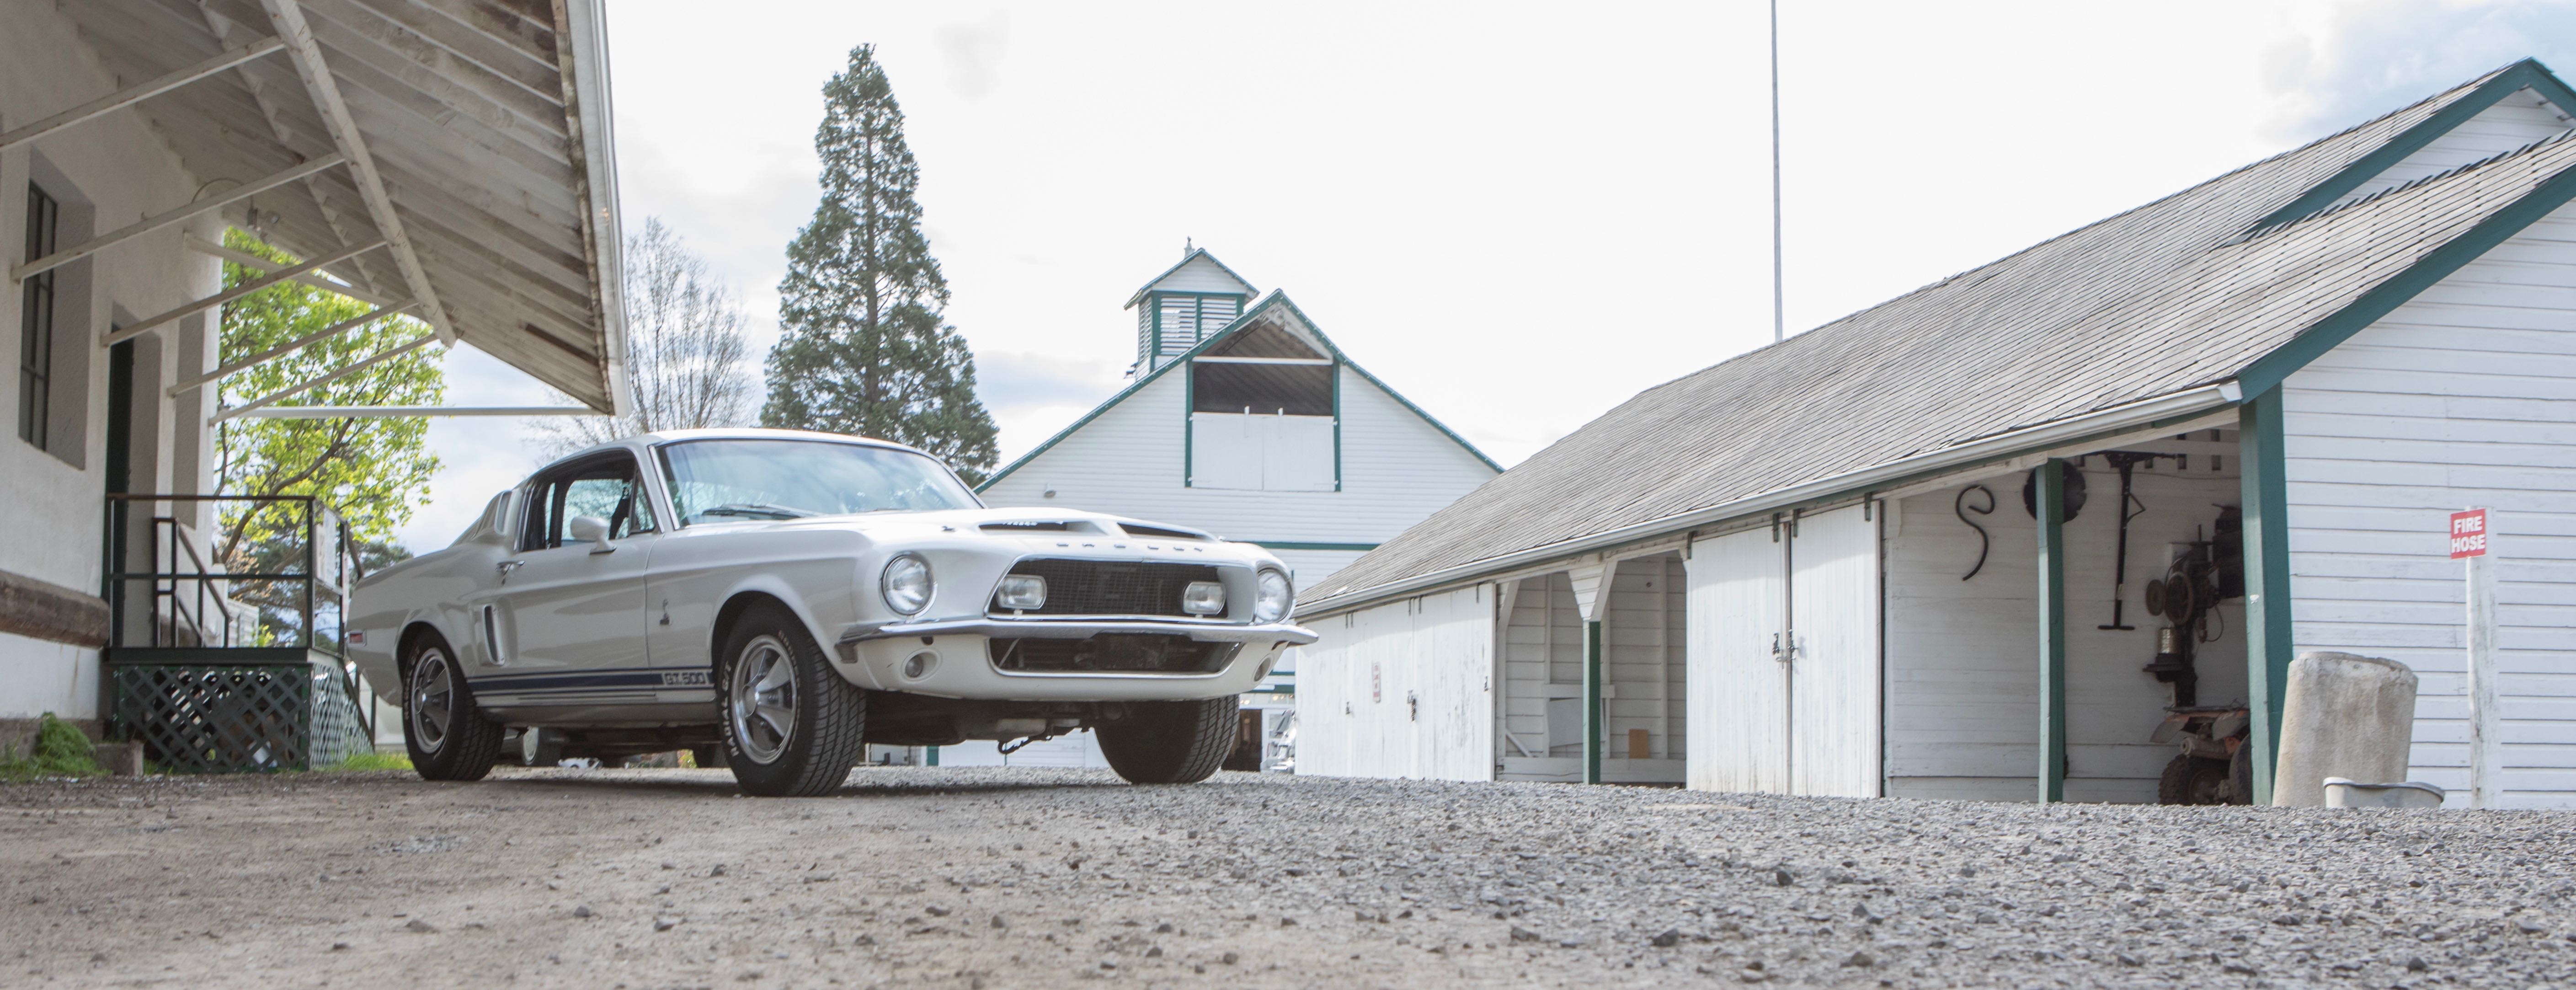 Mustang savvy police officer spotted GT500 stolen 41 years earlier | MAG photos